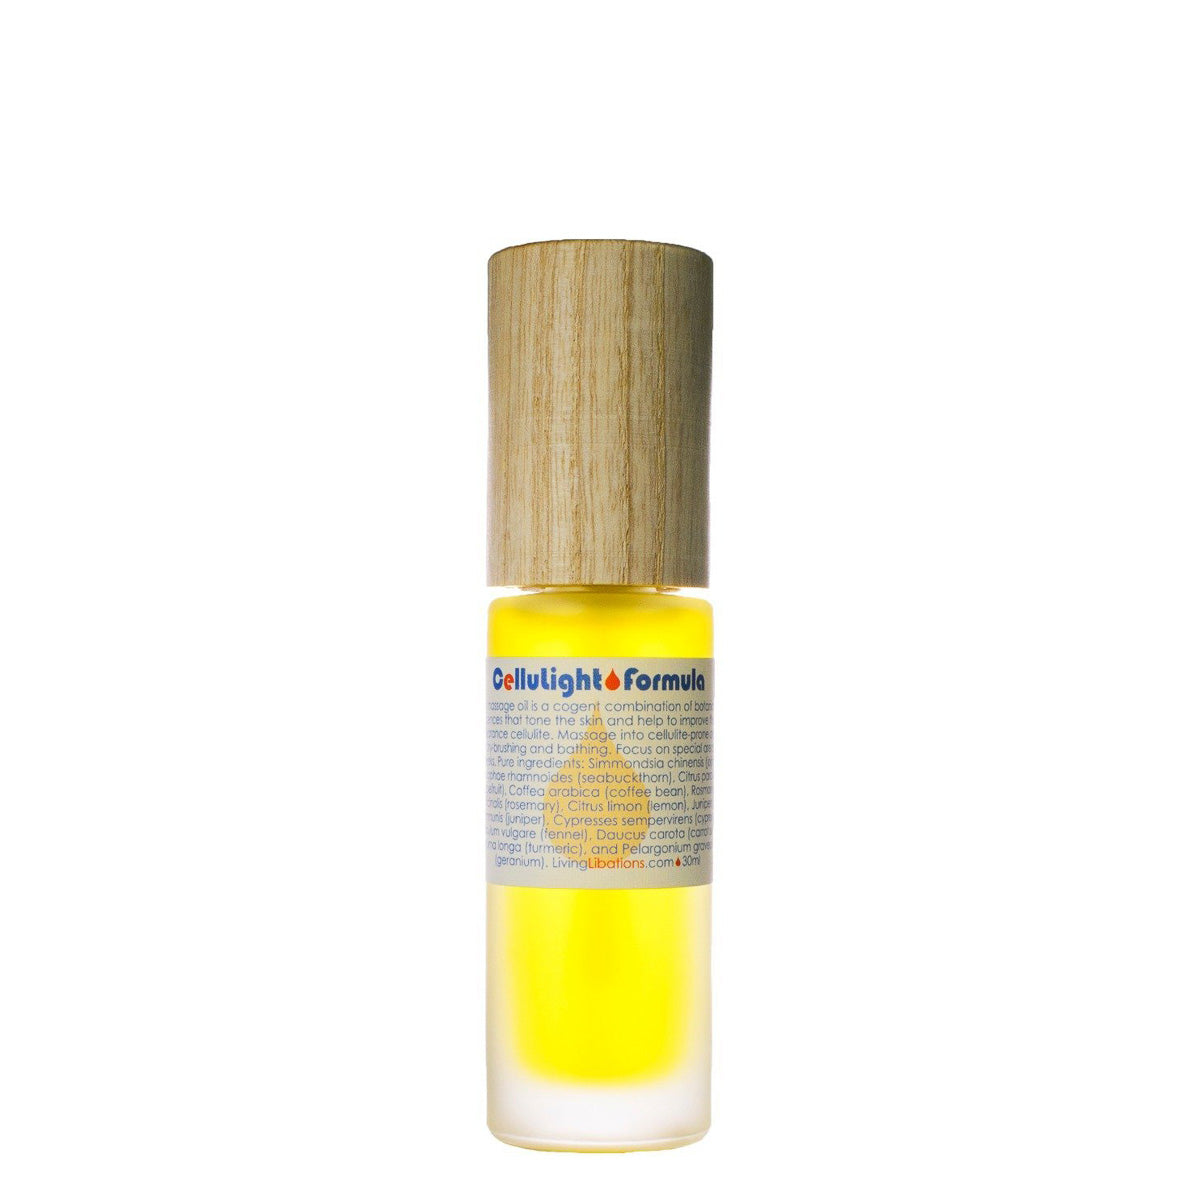 CelluLight Formula | Living Libations | Raw Living UK | Beauty | Skin Care | Living Libations CelluLight formula is a natural &amp; vegan combination of botanical essences that tone the skin and help to improve the appearance cellulite.